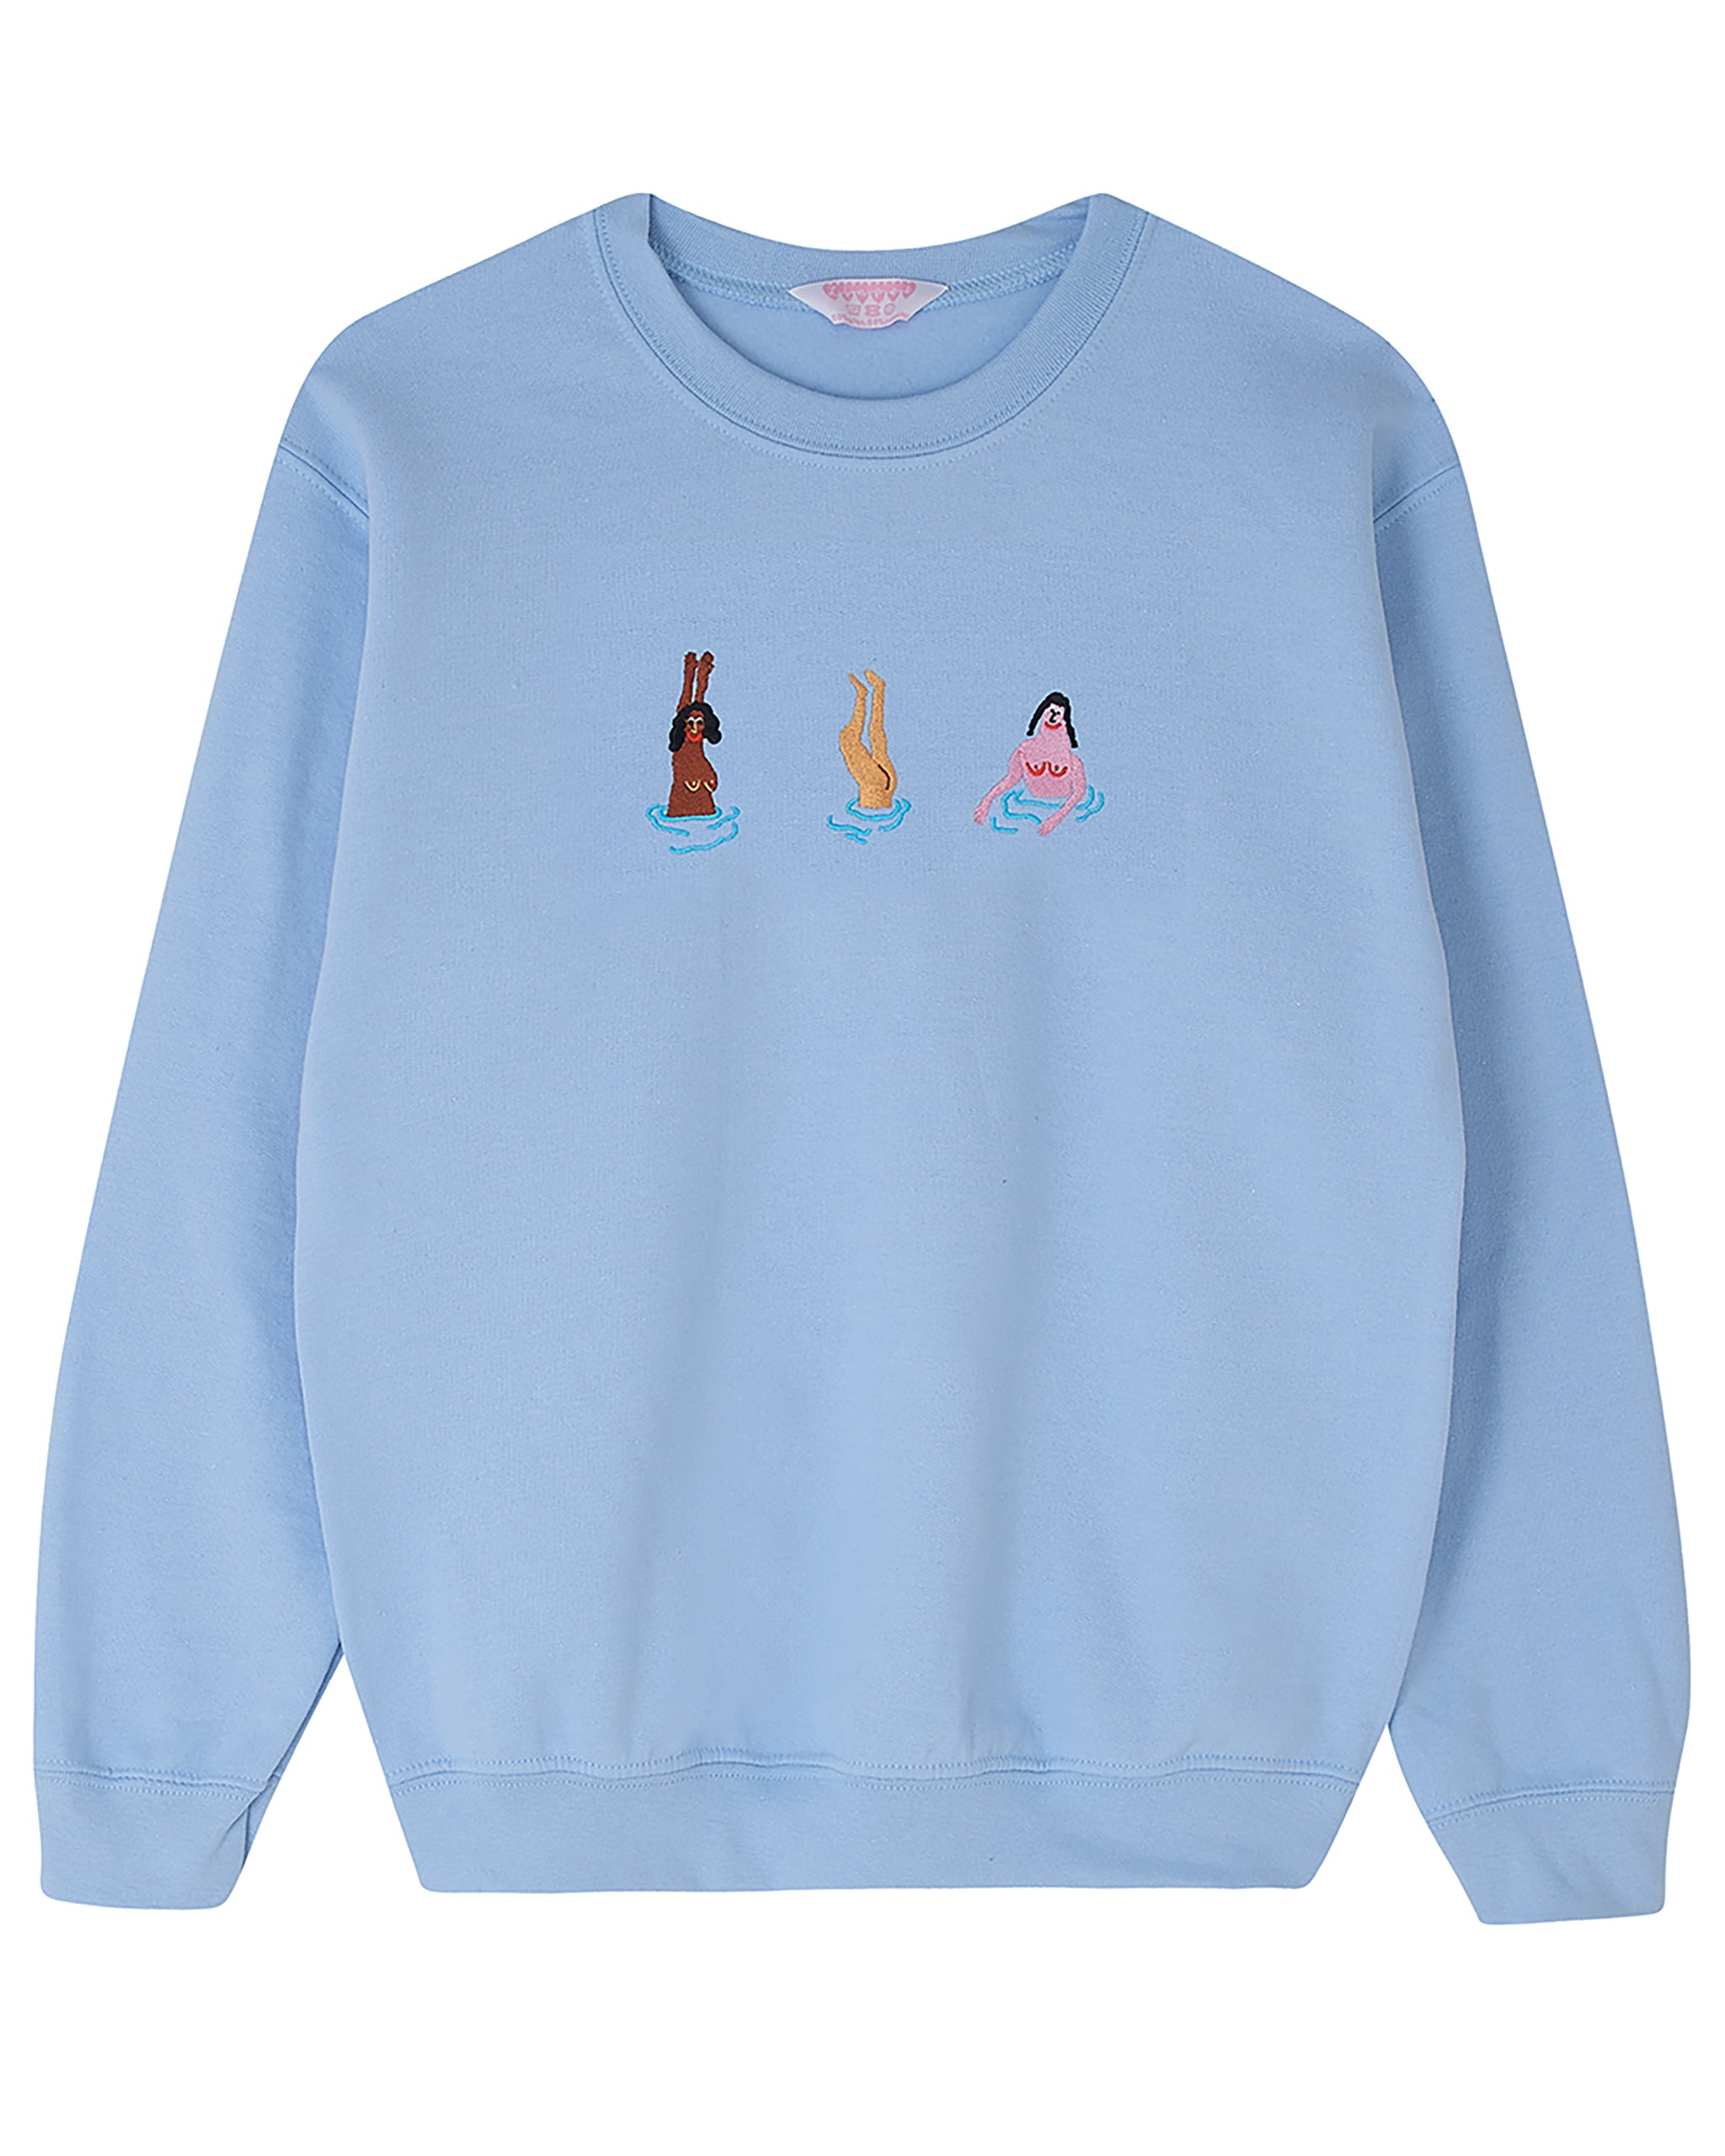 Swimming Ladies Embroidered Sweatshirt - Limpet Store